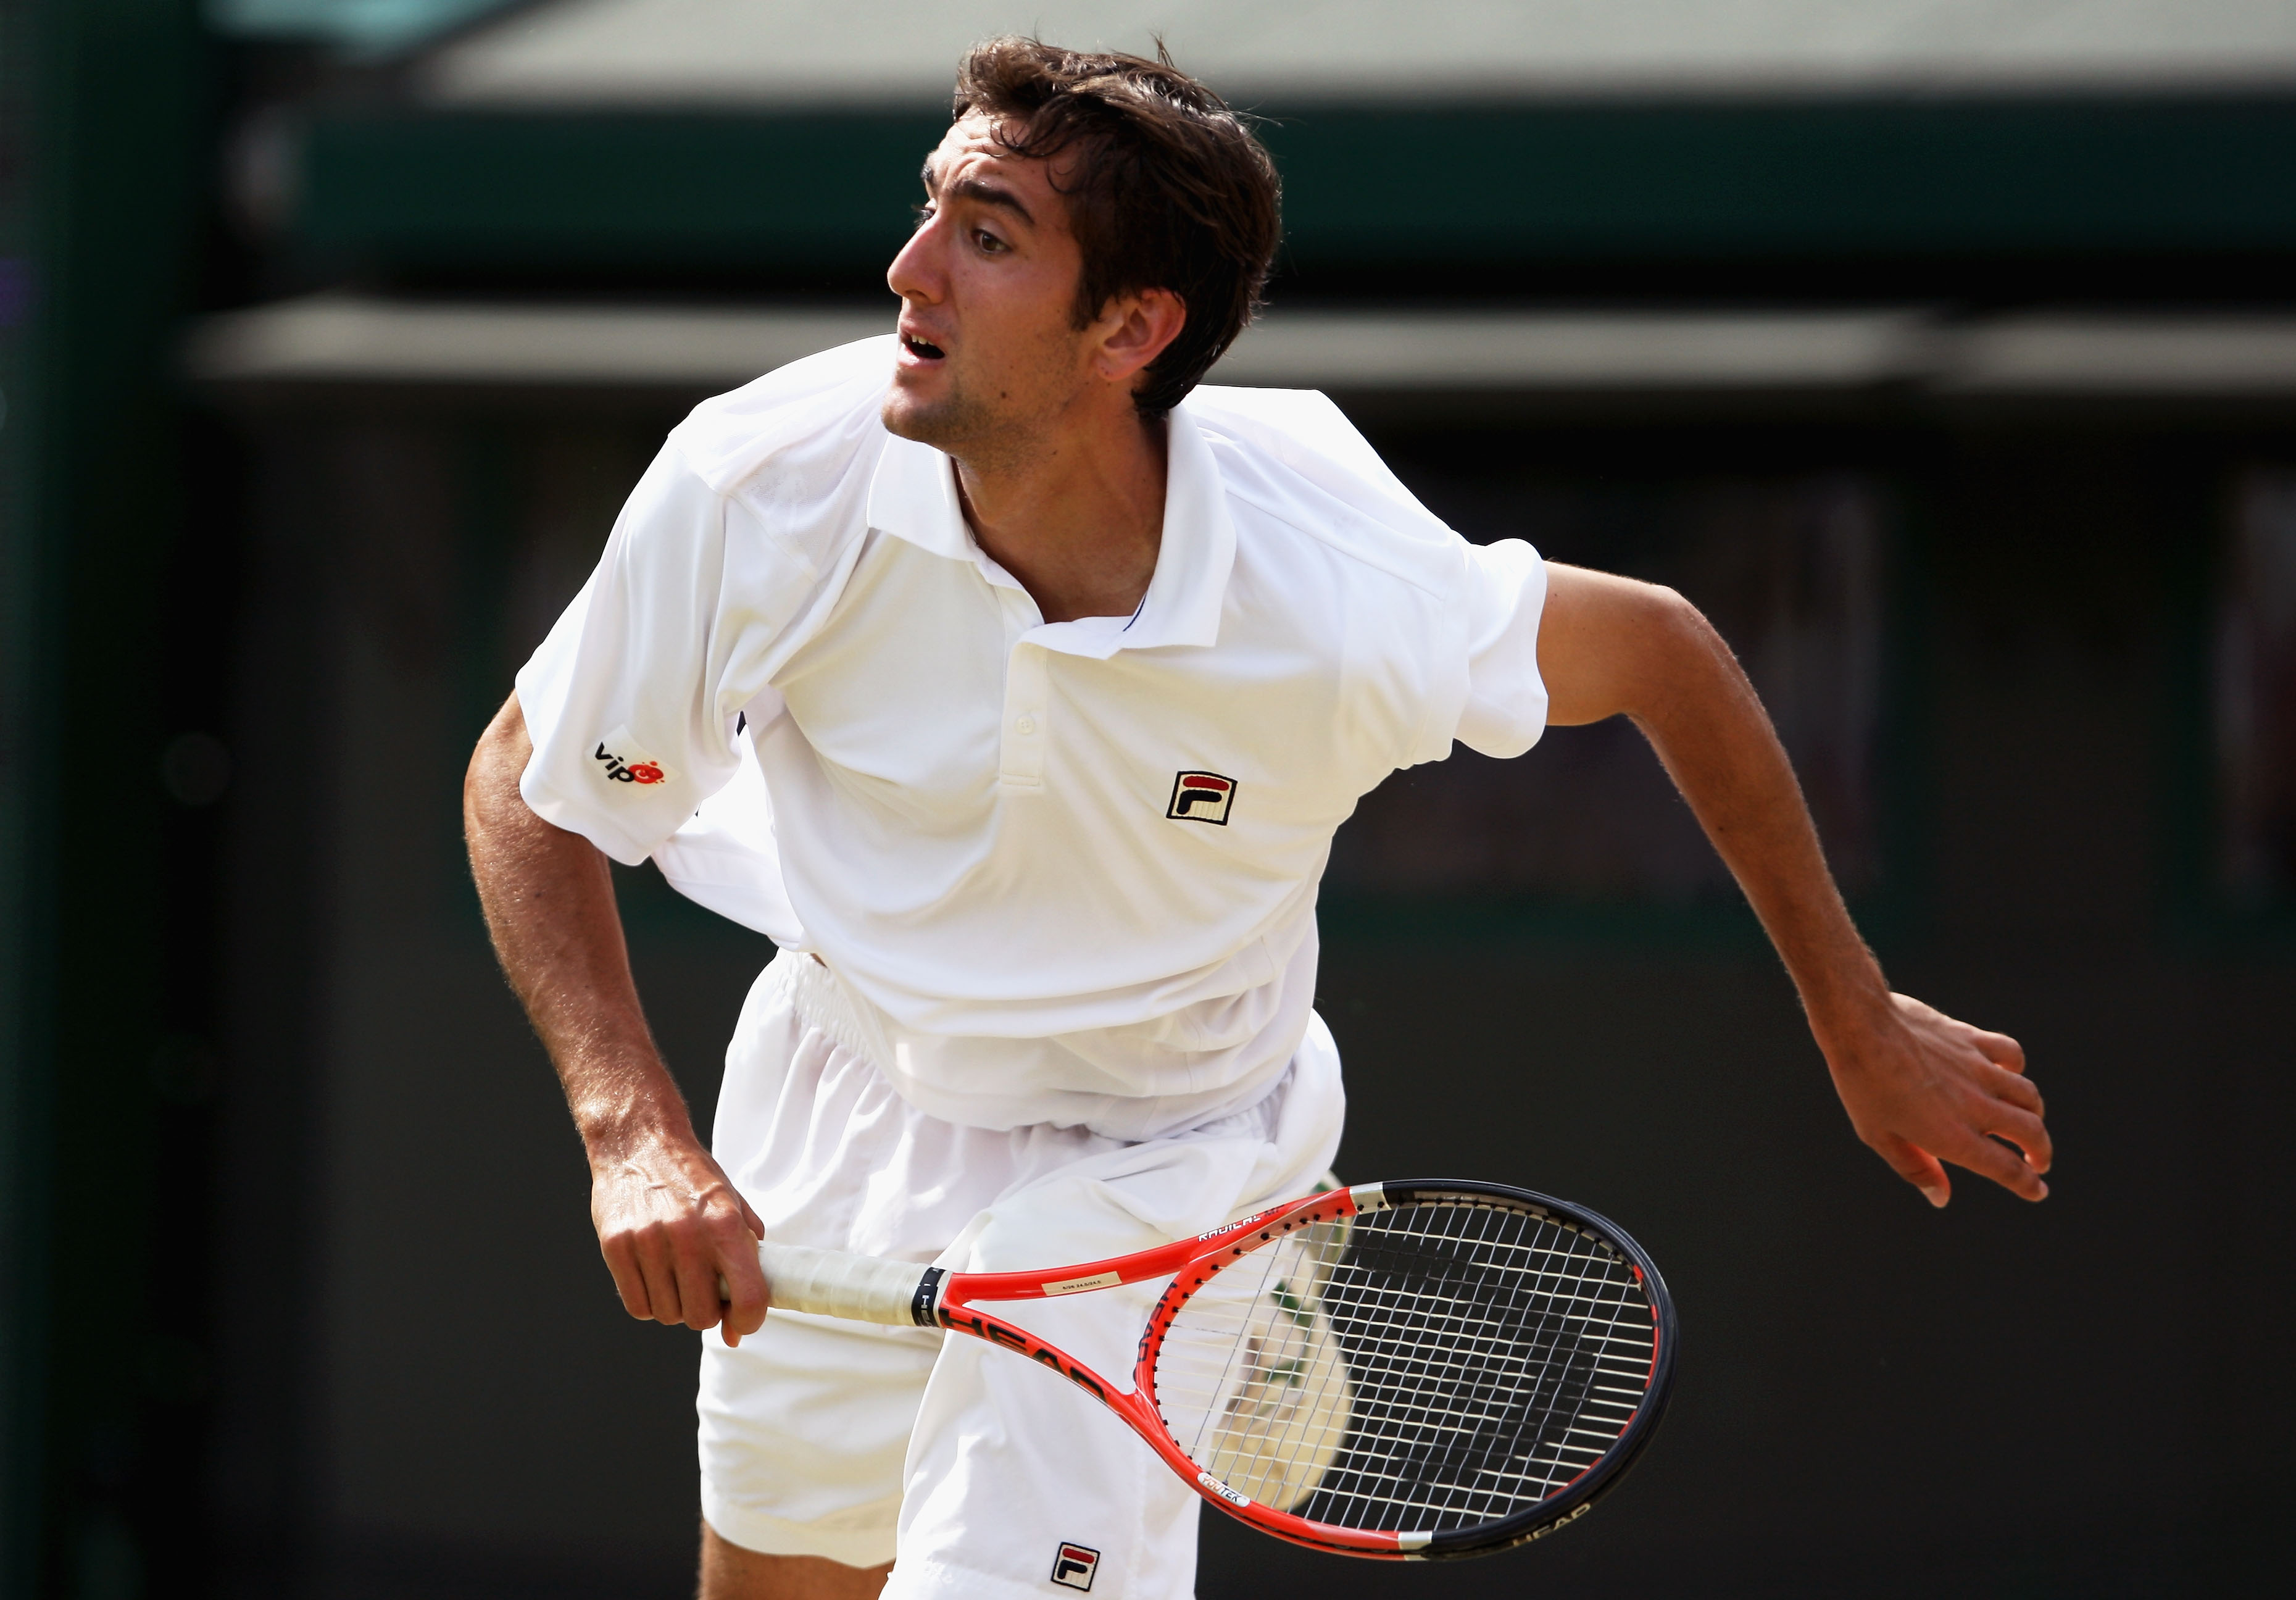 WIMBLEDON, ENGLAND - JUNE 27:  Marin Cilic of Croatia serves during the men's singles third round match against Tommy Haas of Germany on Day Six of the Wimbledon Lawn Tennis Championships at the All England Lawn Tennis and Croquet Club on June 27, 2009 in